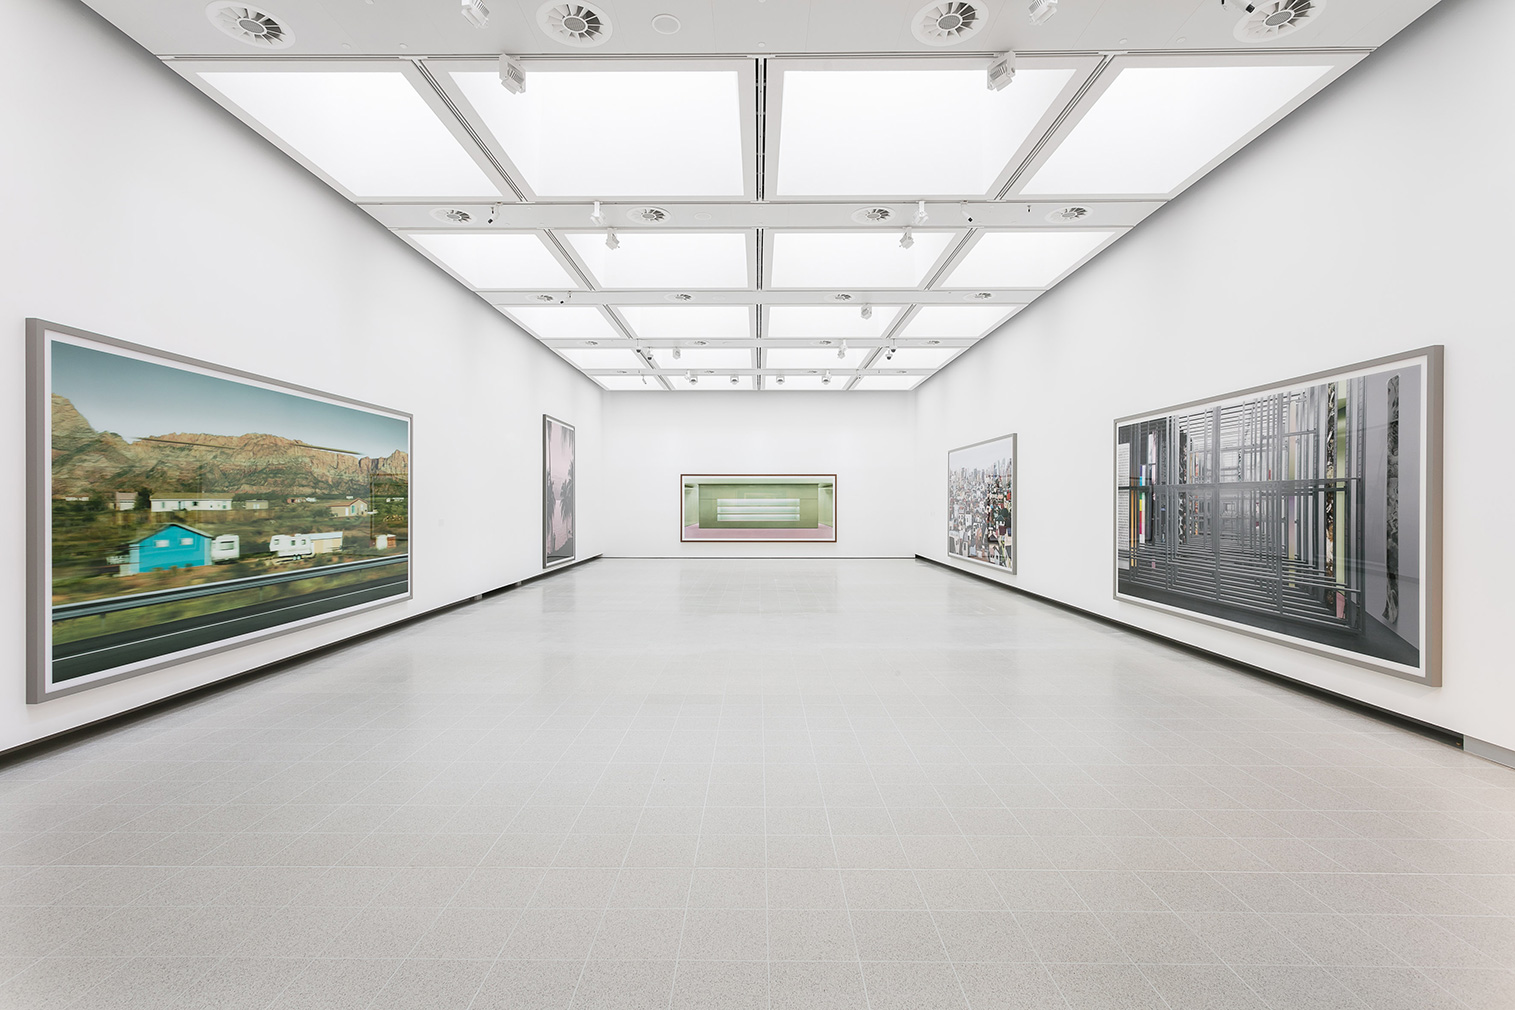 Installation view of the Andreas Gursky exhibition at Hayward Gallery